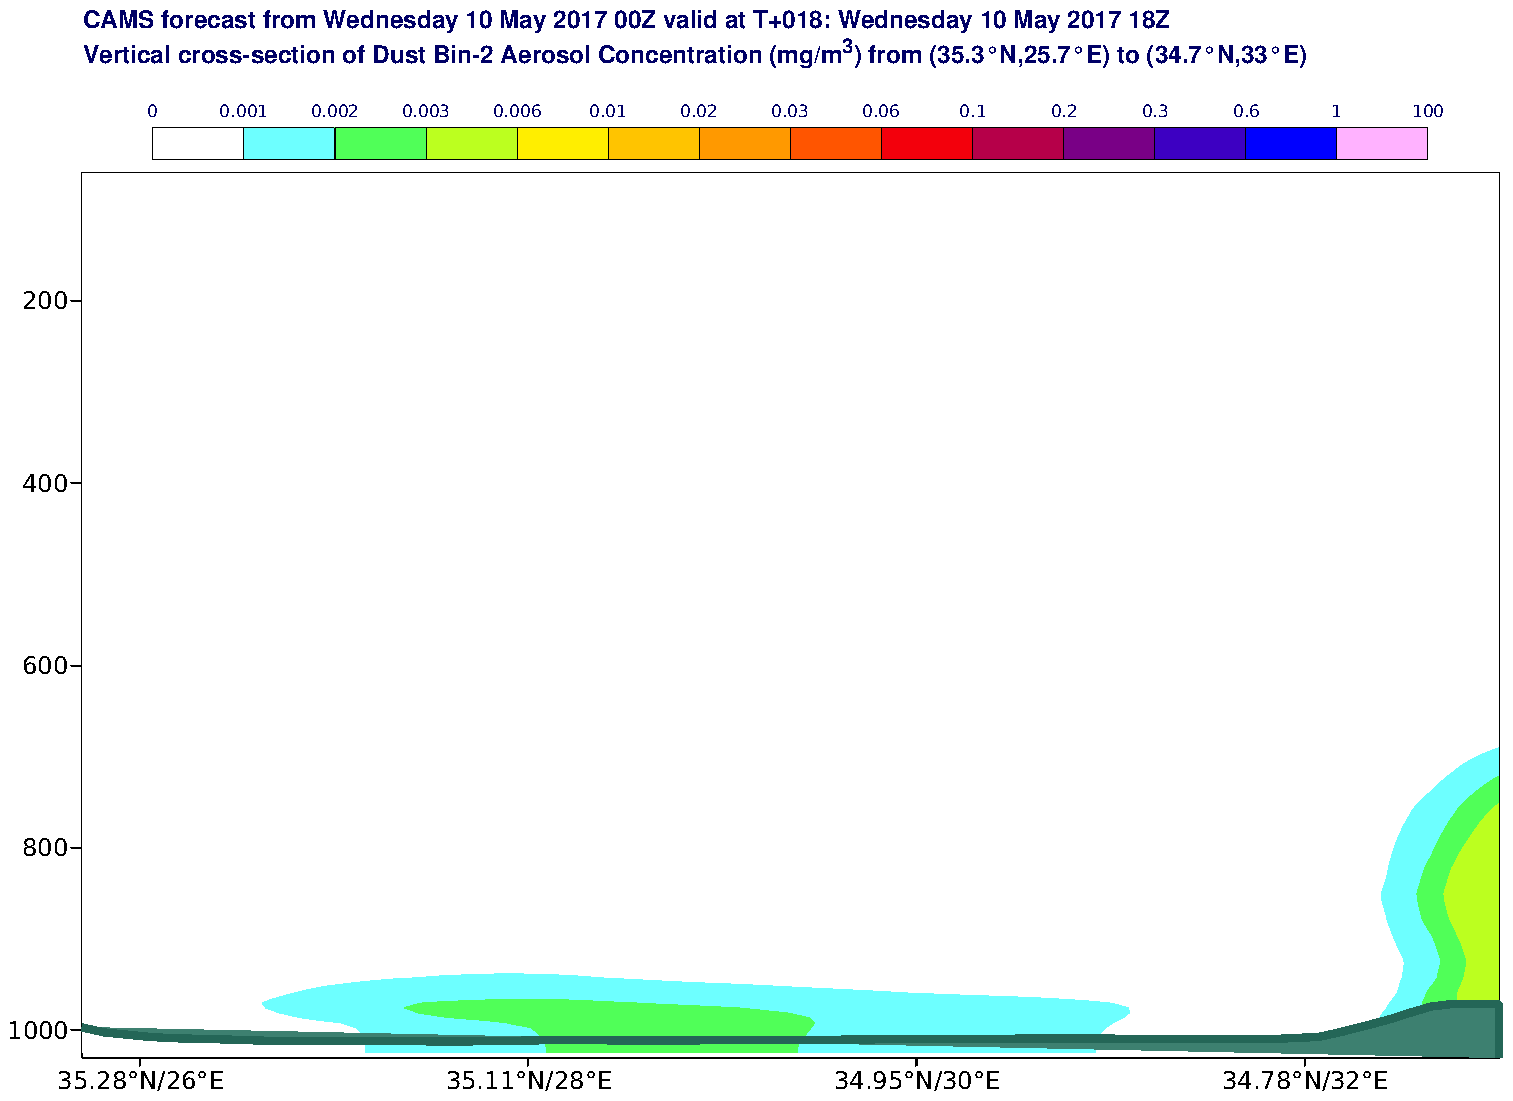 Vertical cross-section of Dust Bin-2 Aerosol Concentration (mg/m3) valid at T18 - 2017-05-10 18:00